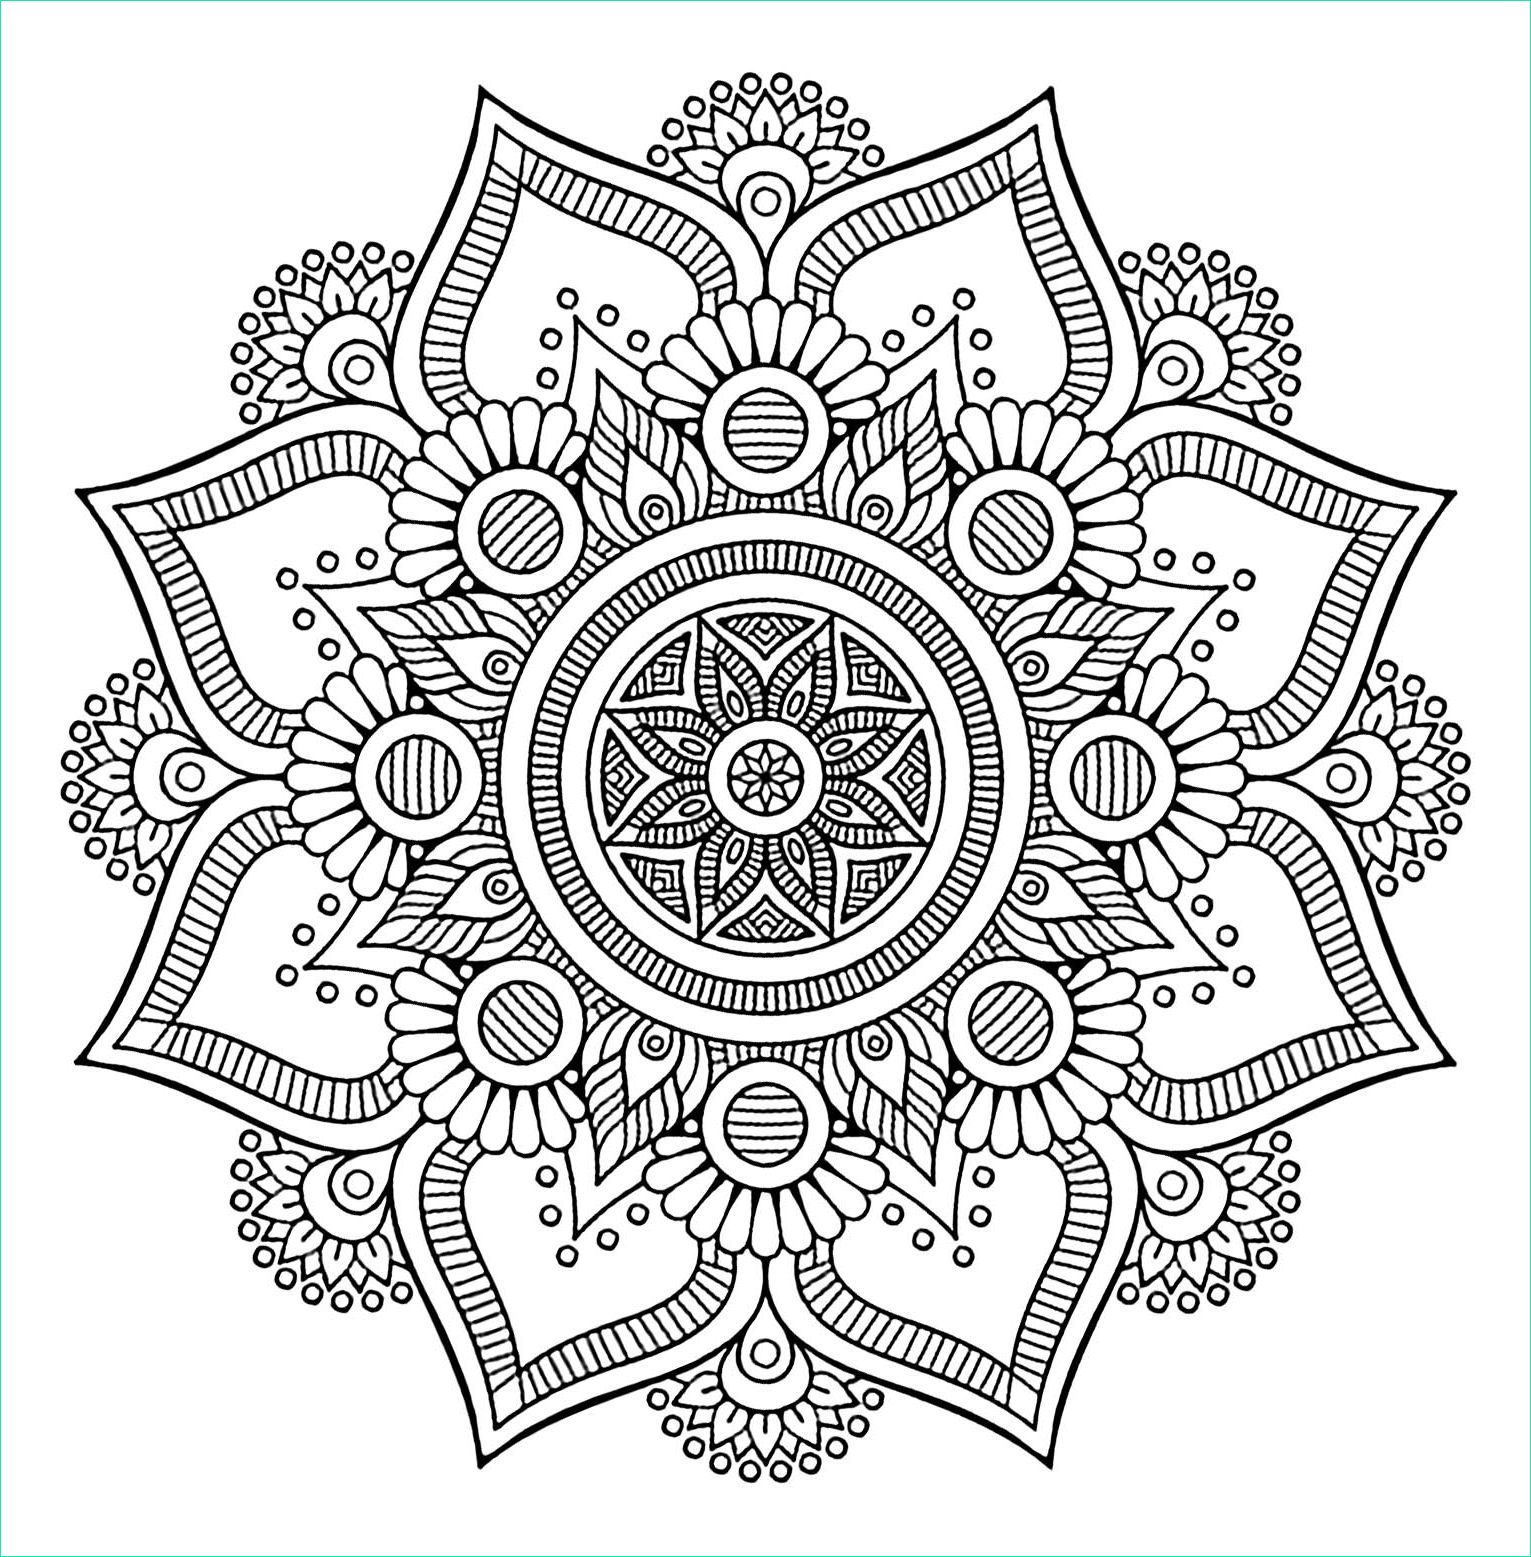 Coloriage Madala Beau Images the Big Flower Mandalas Adult Coloring Pages